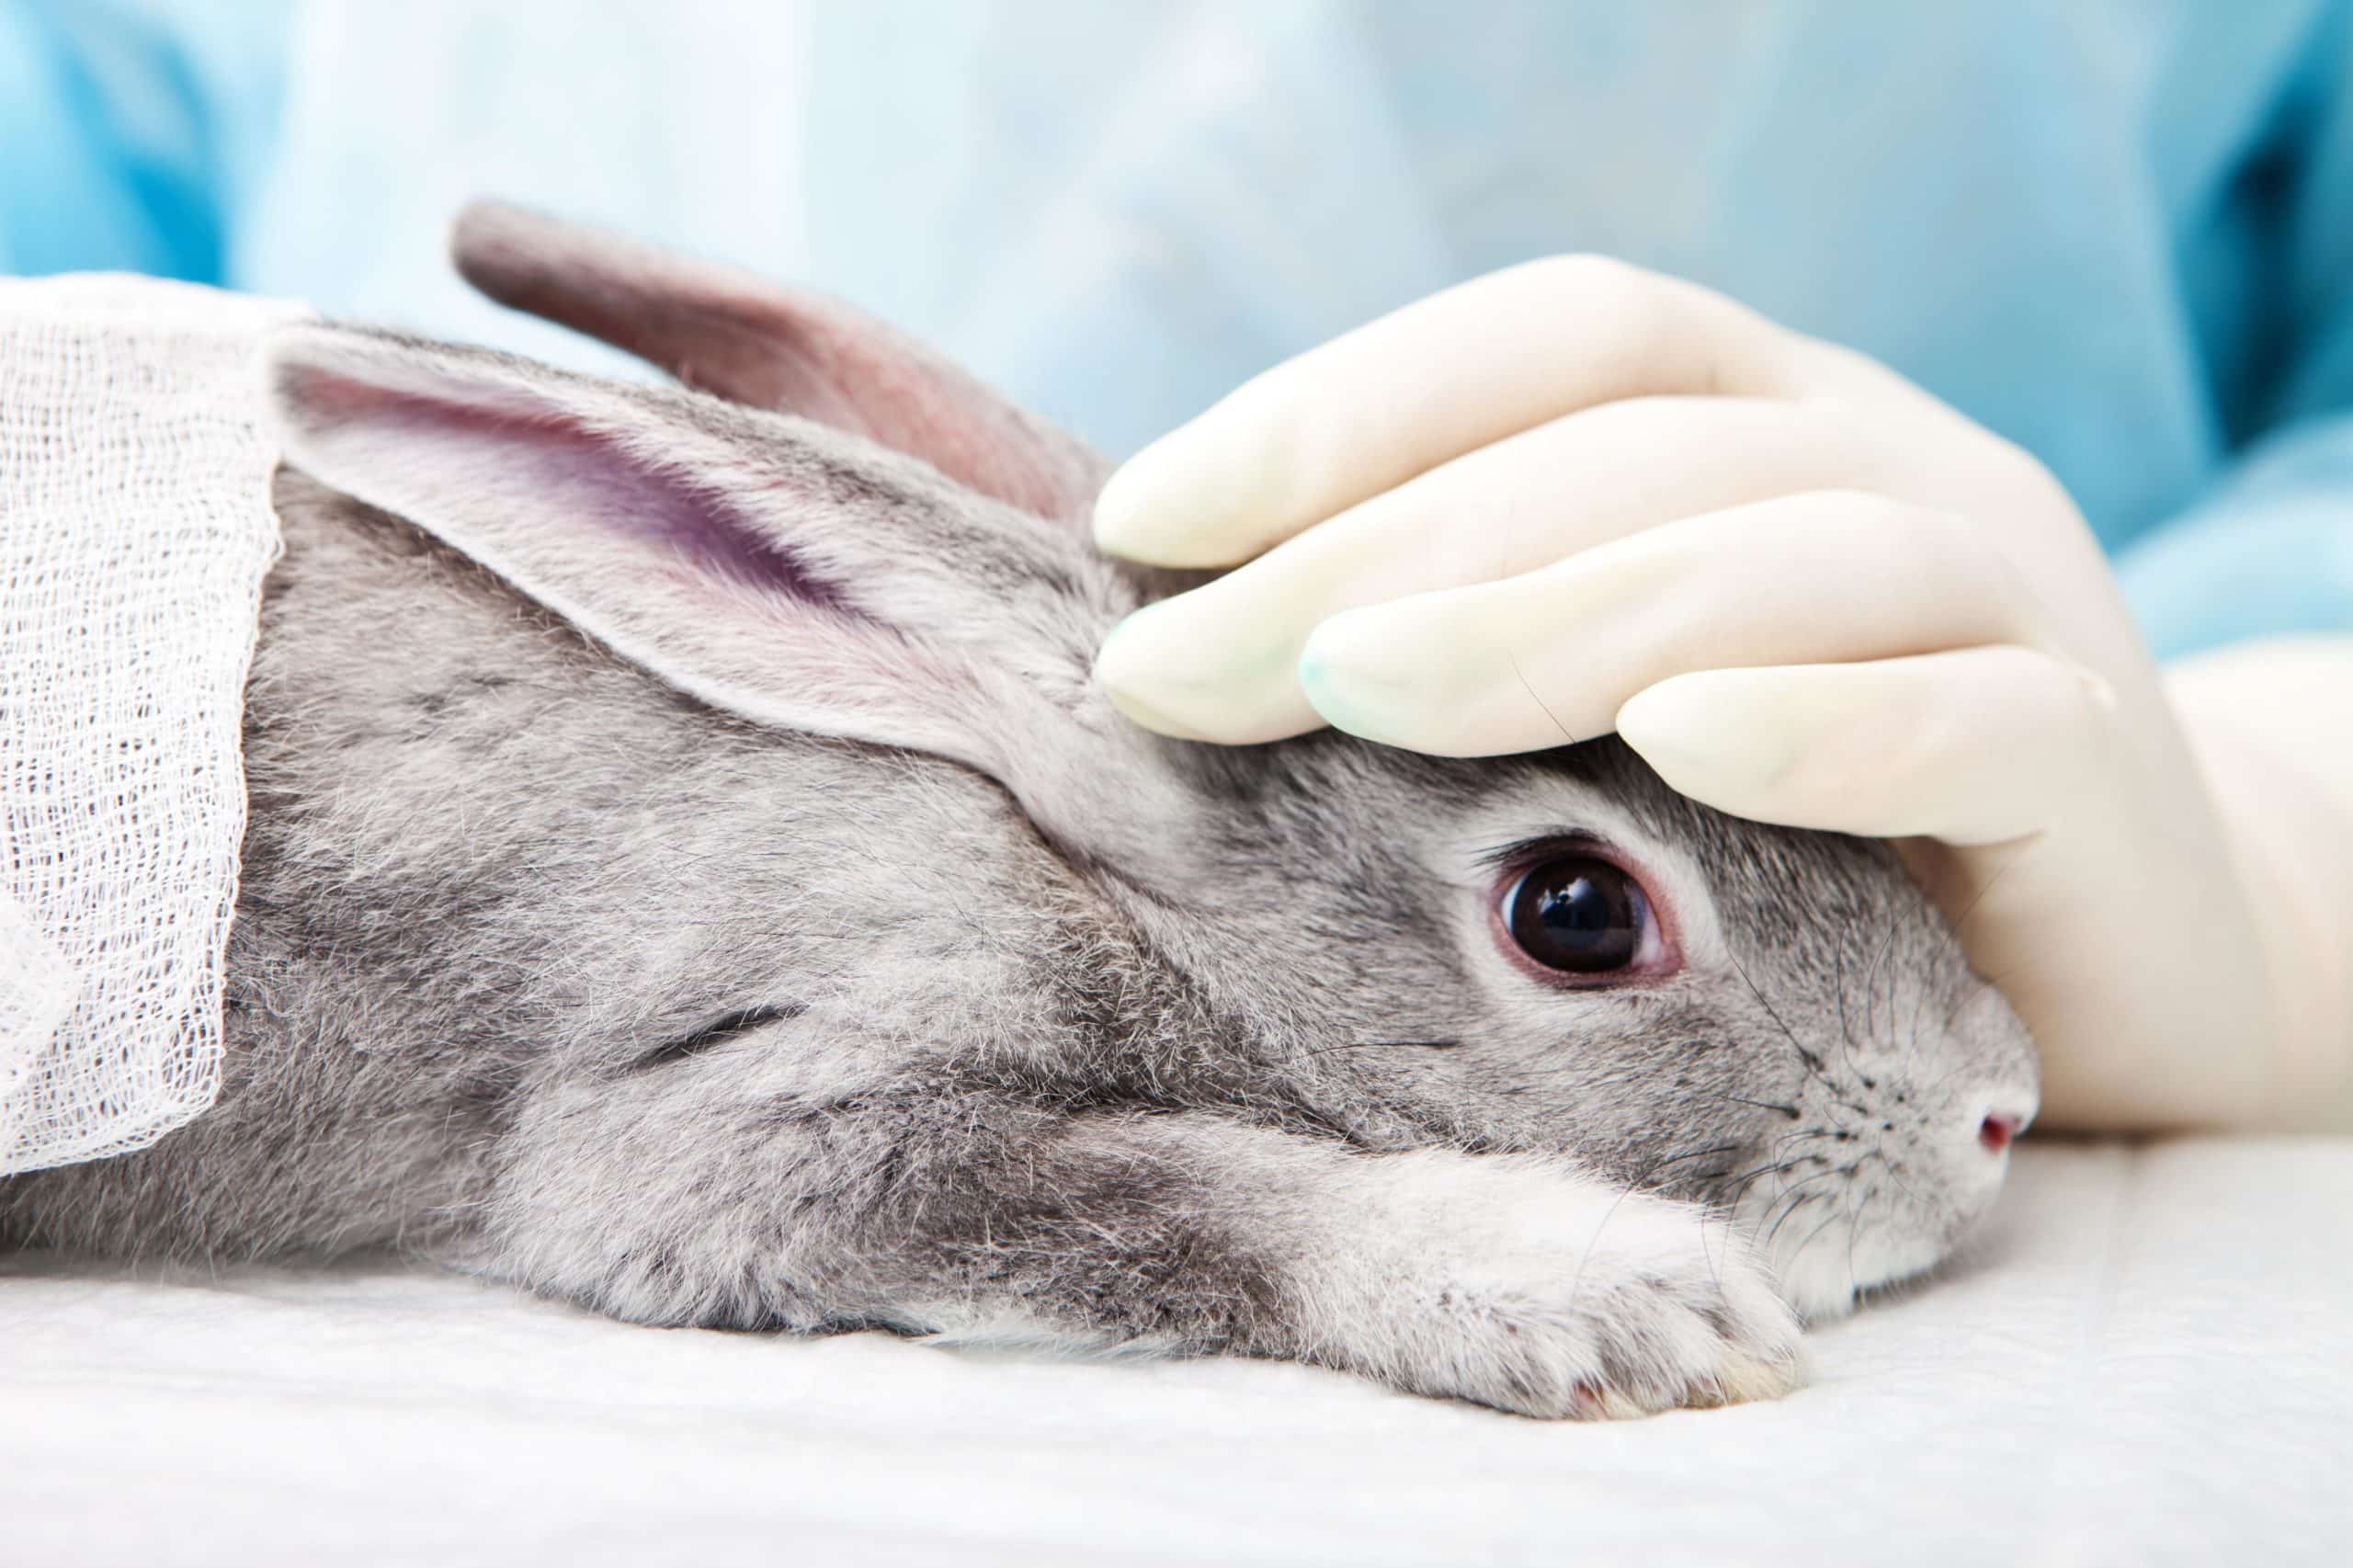 Sign the pledge to Be Cruelty Free!